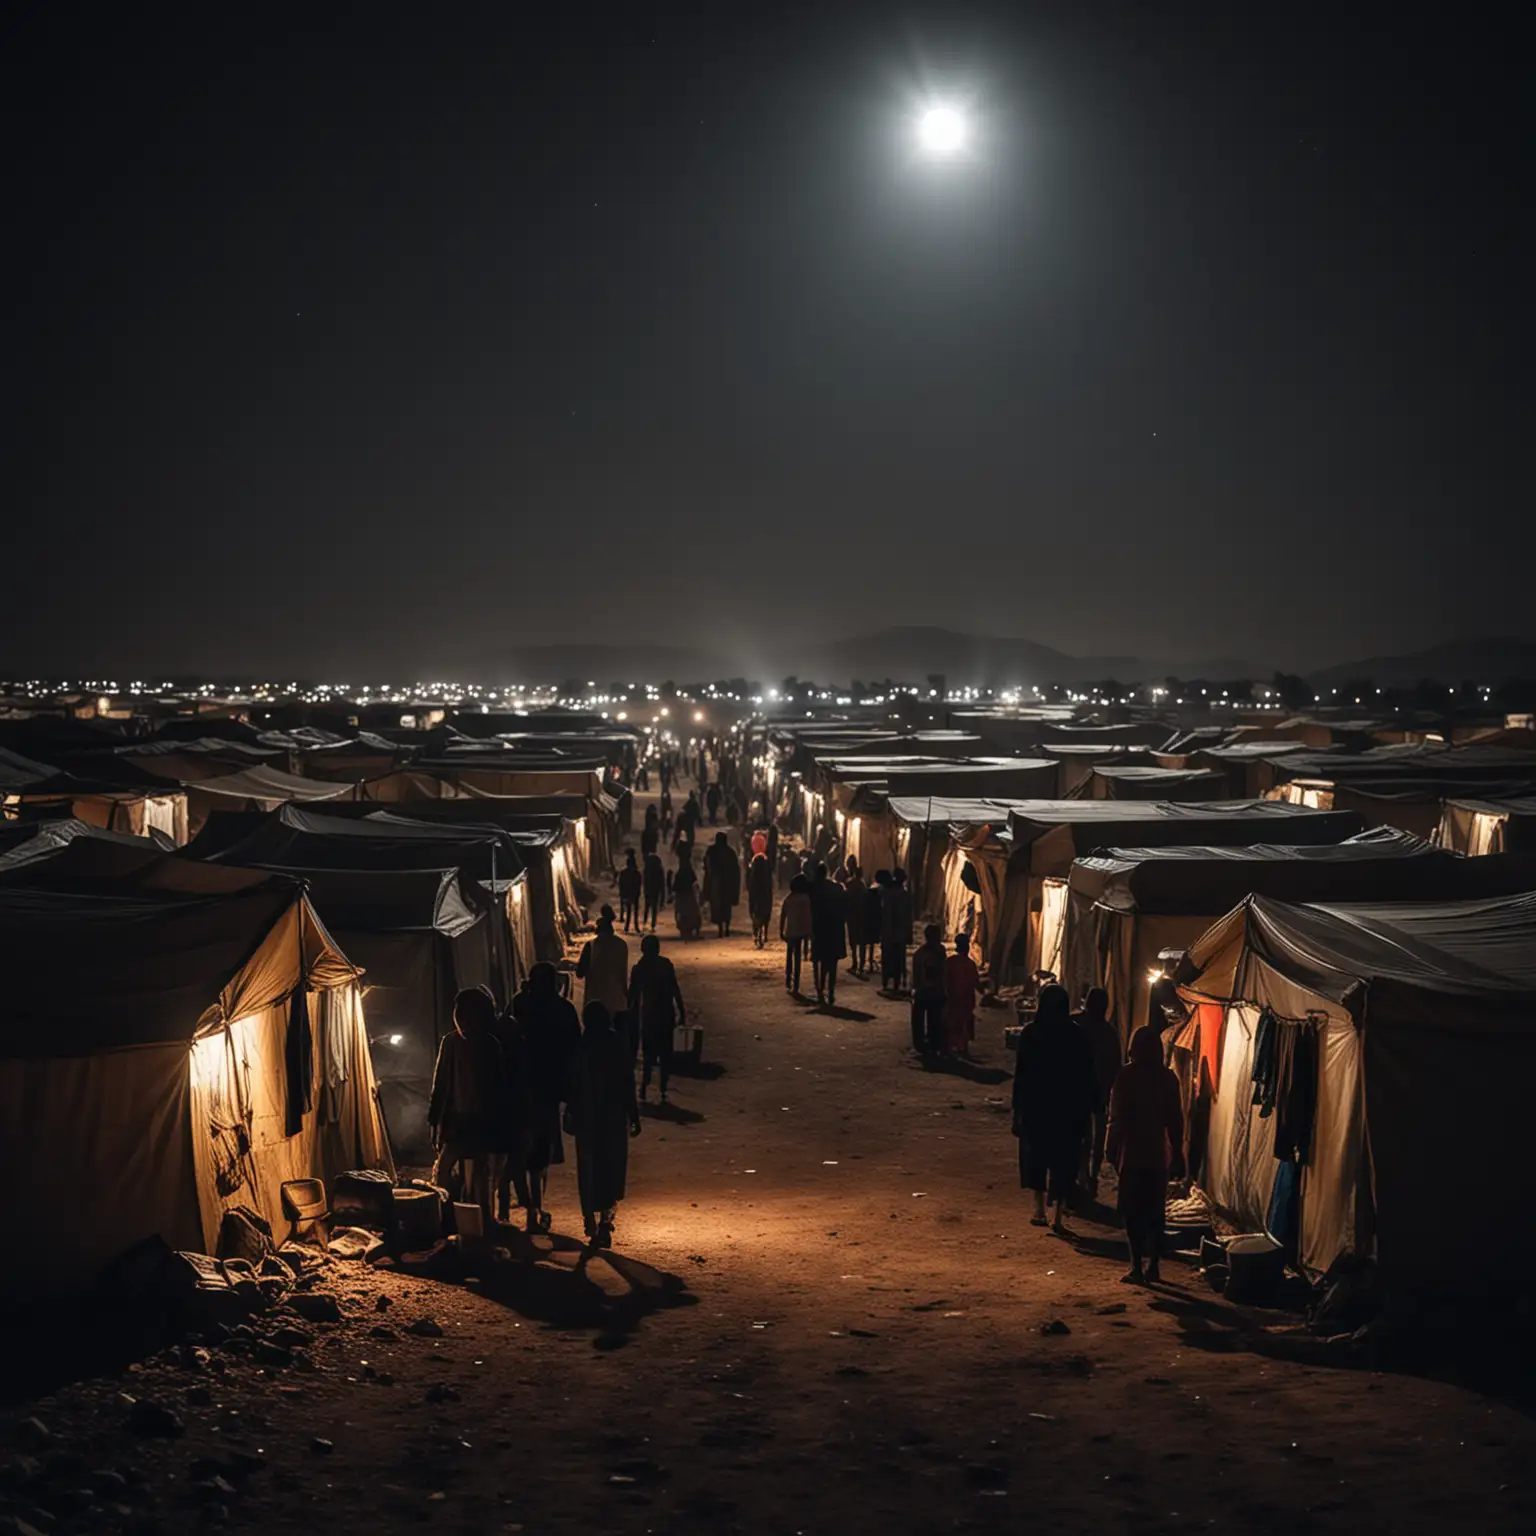 Refugees Sheltering in Darkness at Night